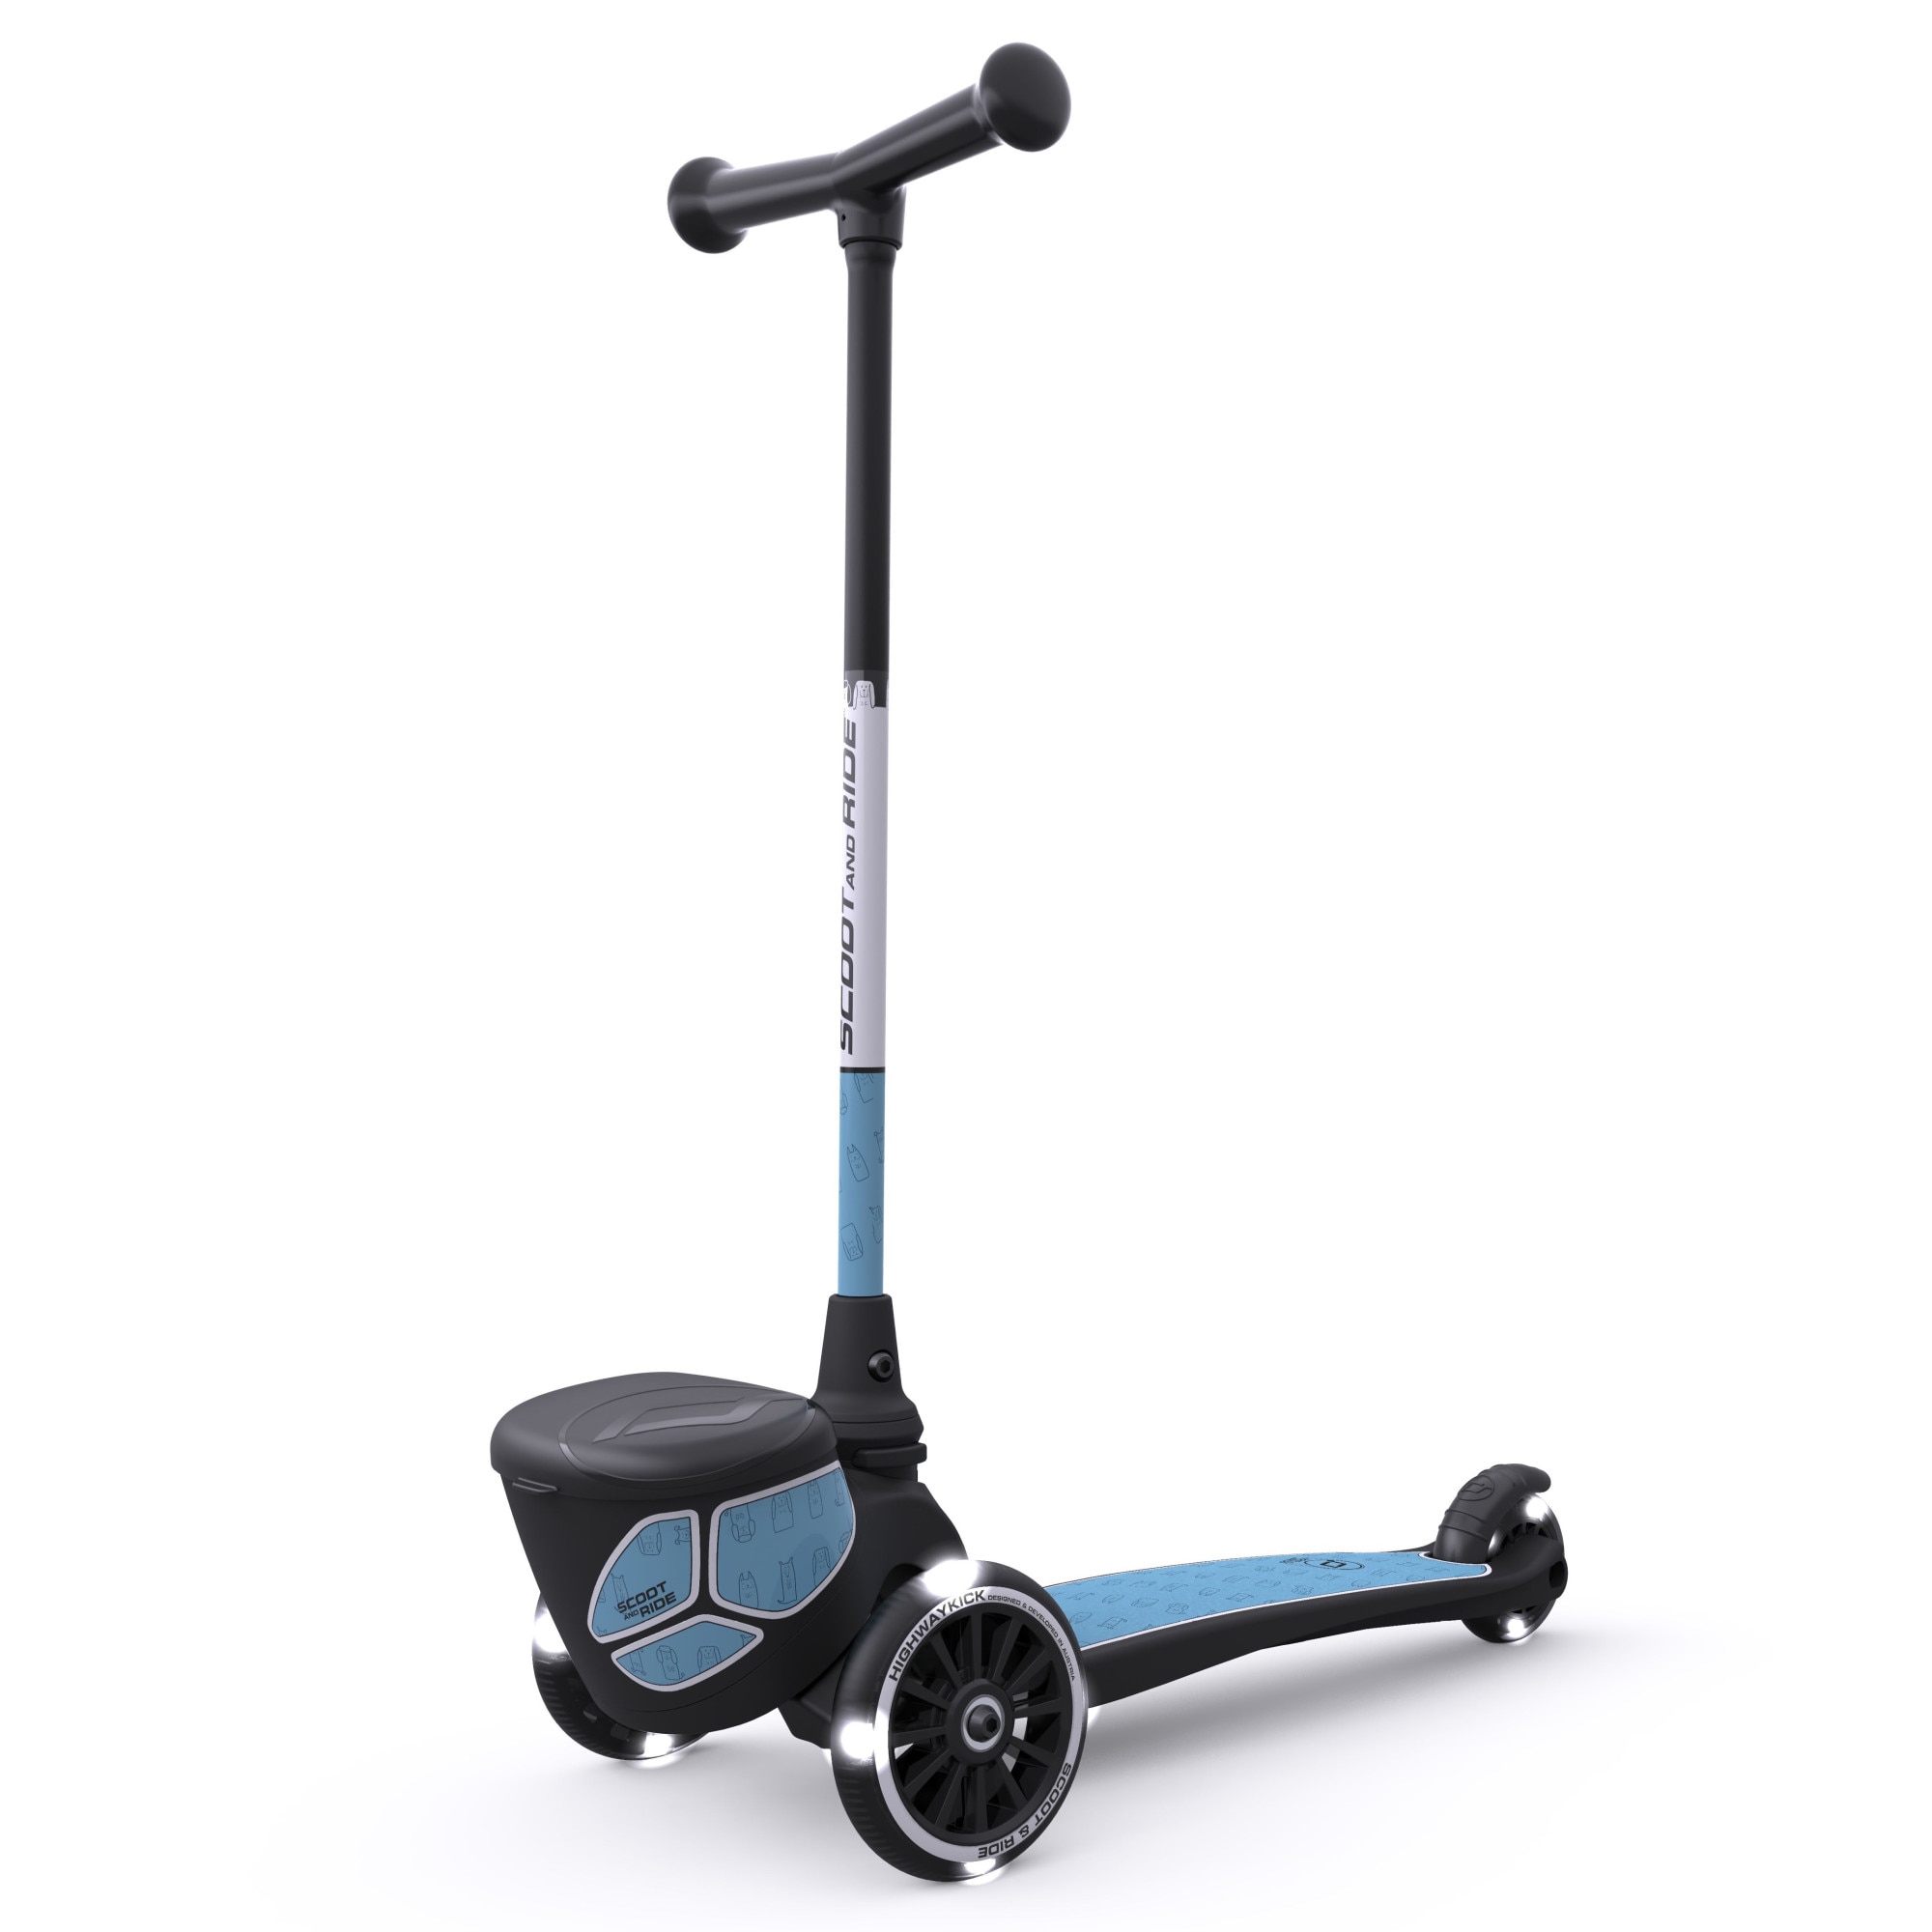 Scoot and Ride Trotinete 2 em 1 Highwaykick One Steel